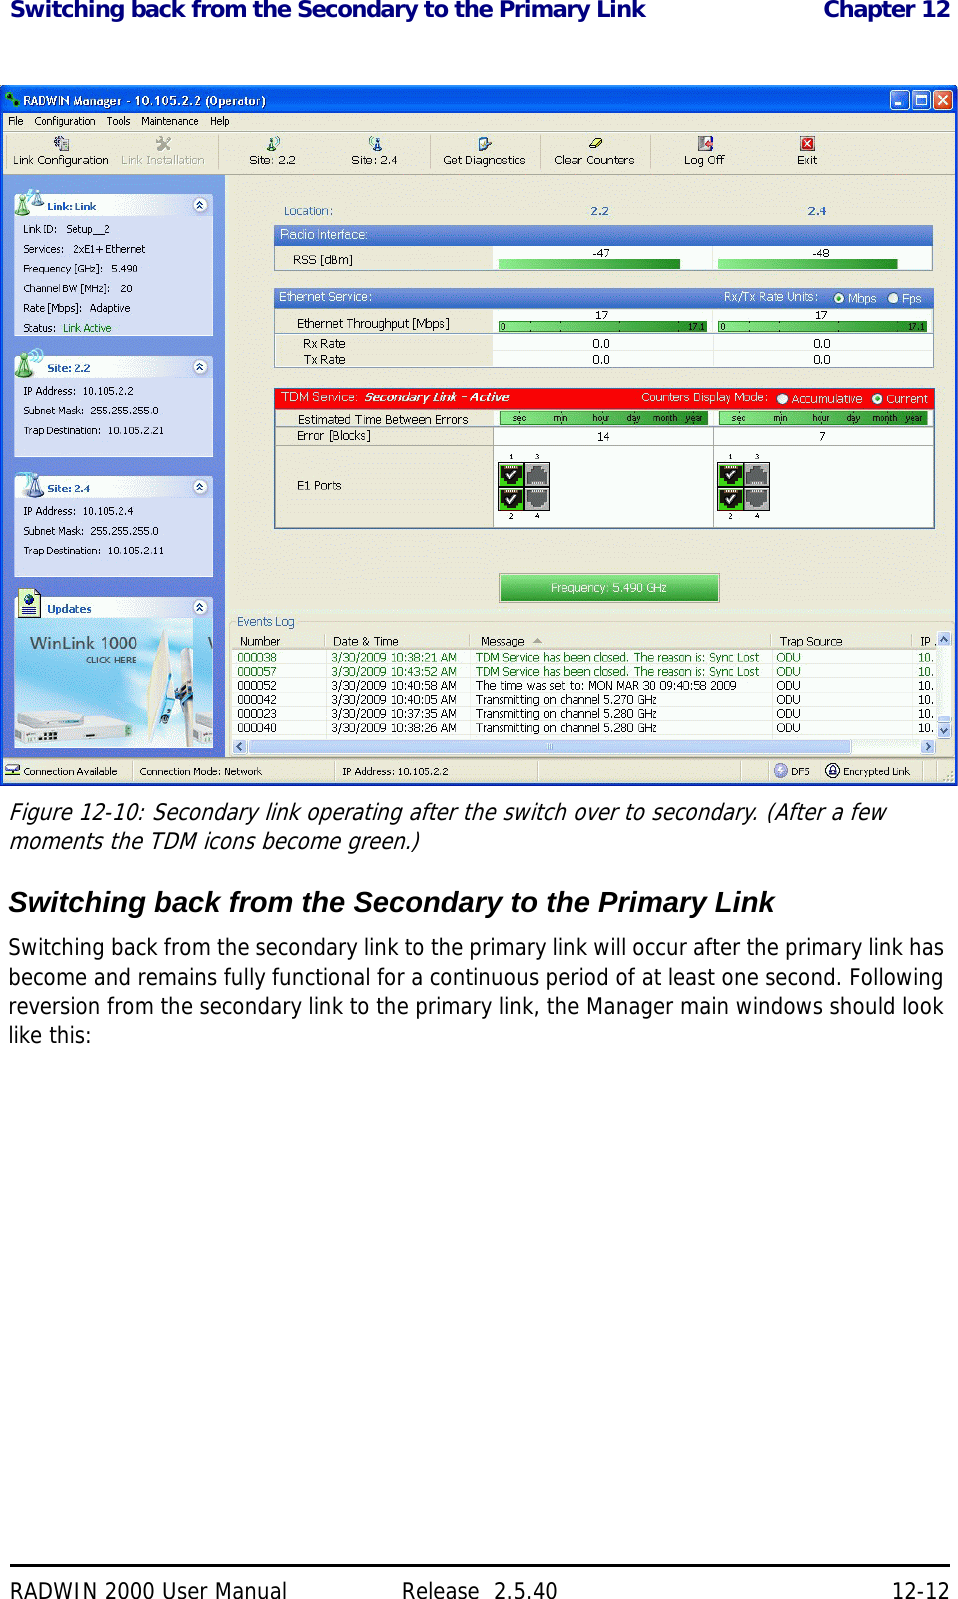 Switching back from the Secondary to the Primary Link Chapter 12RADWIN 2000 User Manual Release  2.5.40 12-12Figure 12-10: Secondary link operating after the switch over to secondary. (After a few moments the TDM icons become green.)Switching back from the Secondary to the Primary LinkSwitching back from the secondary link to the primary link will occur after the primary link has become and remains fully functional for a continuous period of at least one second. Following reversion from the secondary link to the primary link, the Manager main windows should look like this: